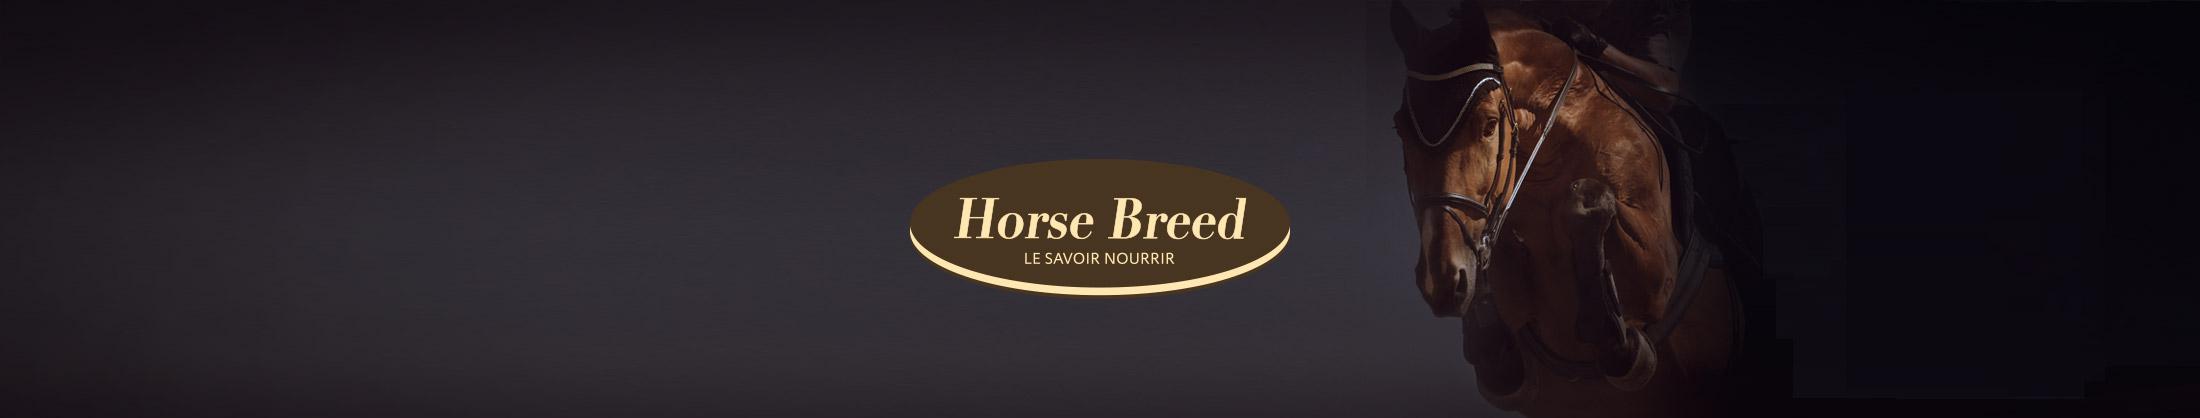 game sport horse breed